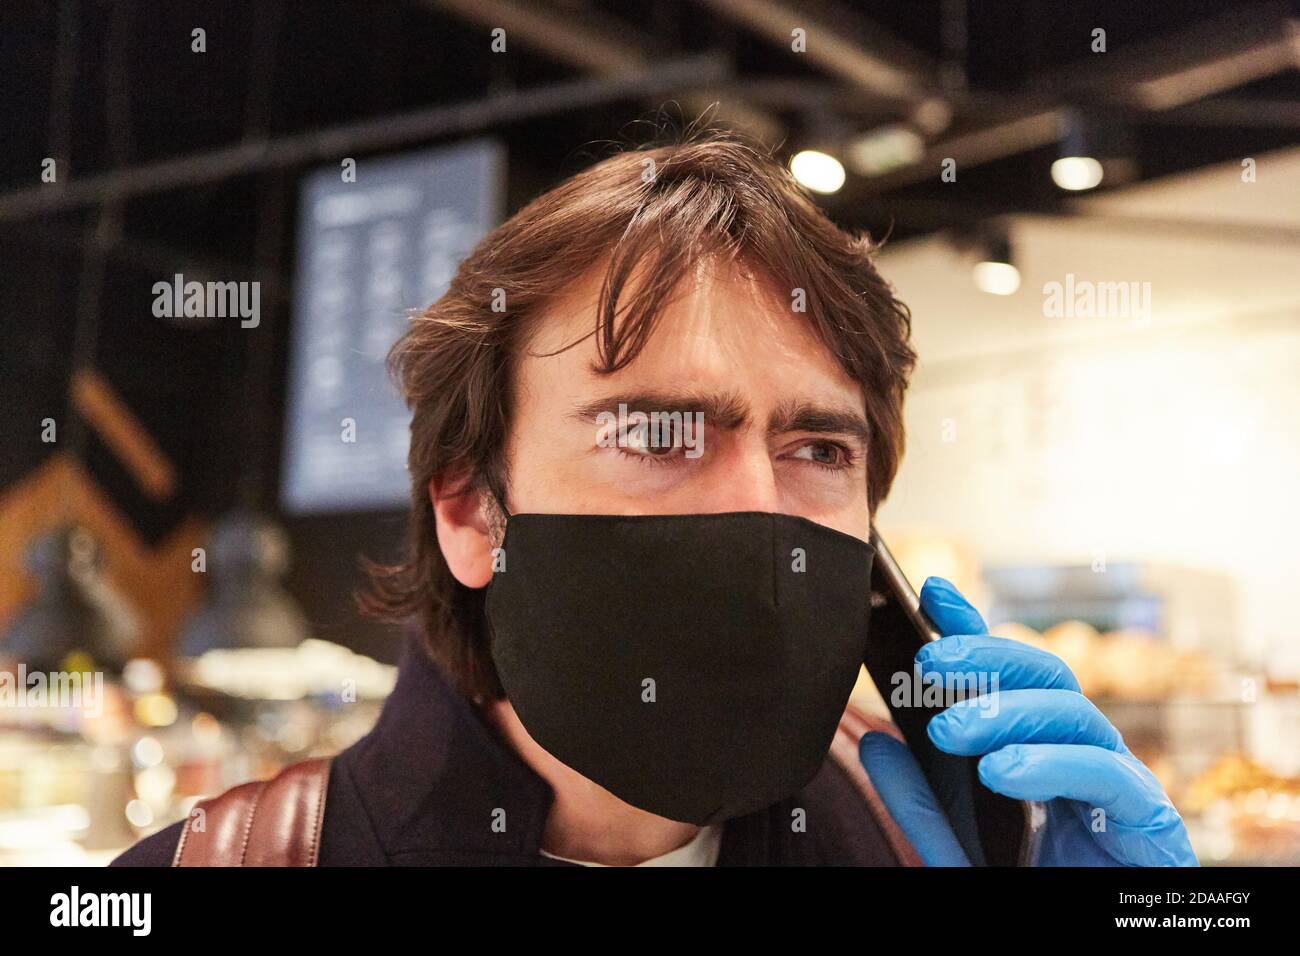 Customer with face mask due to Covid-19 pandemic with smartphone while shopping Stock Photo